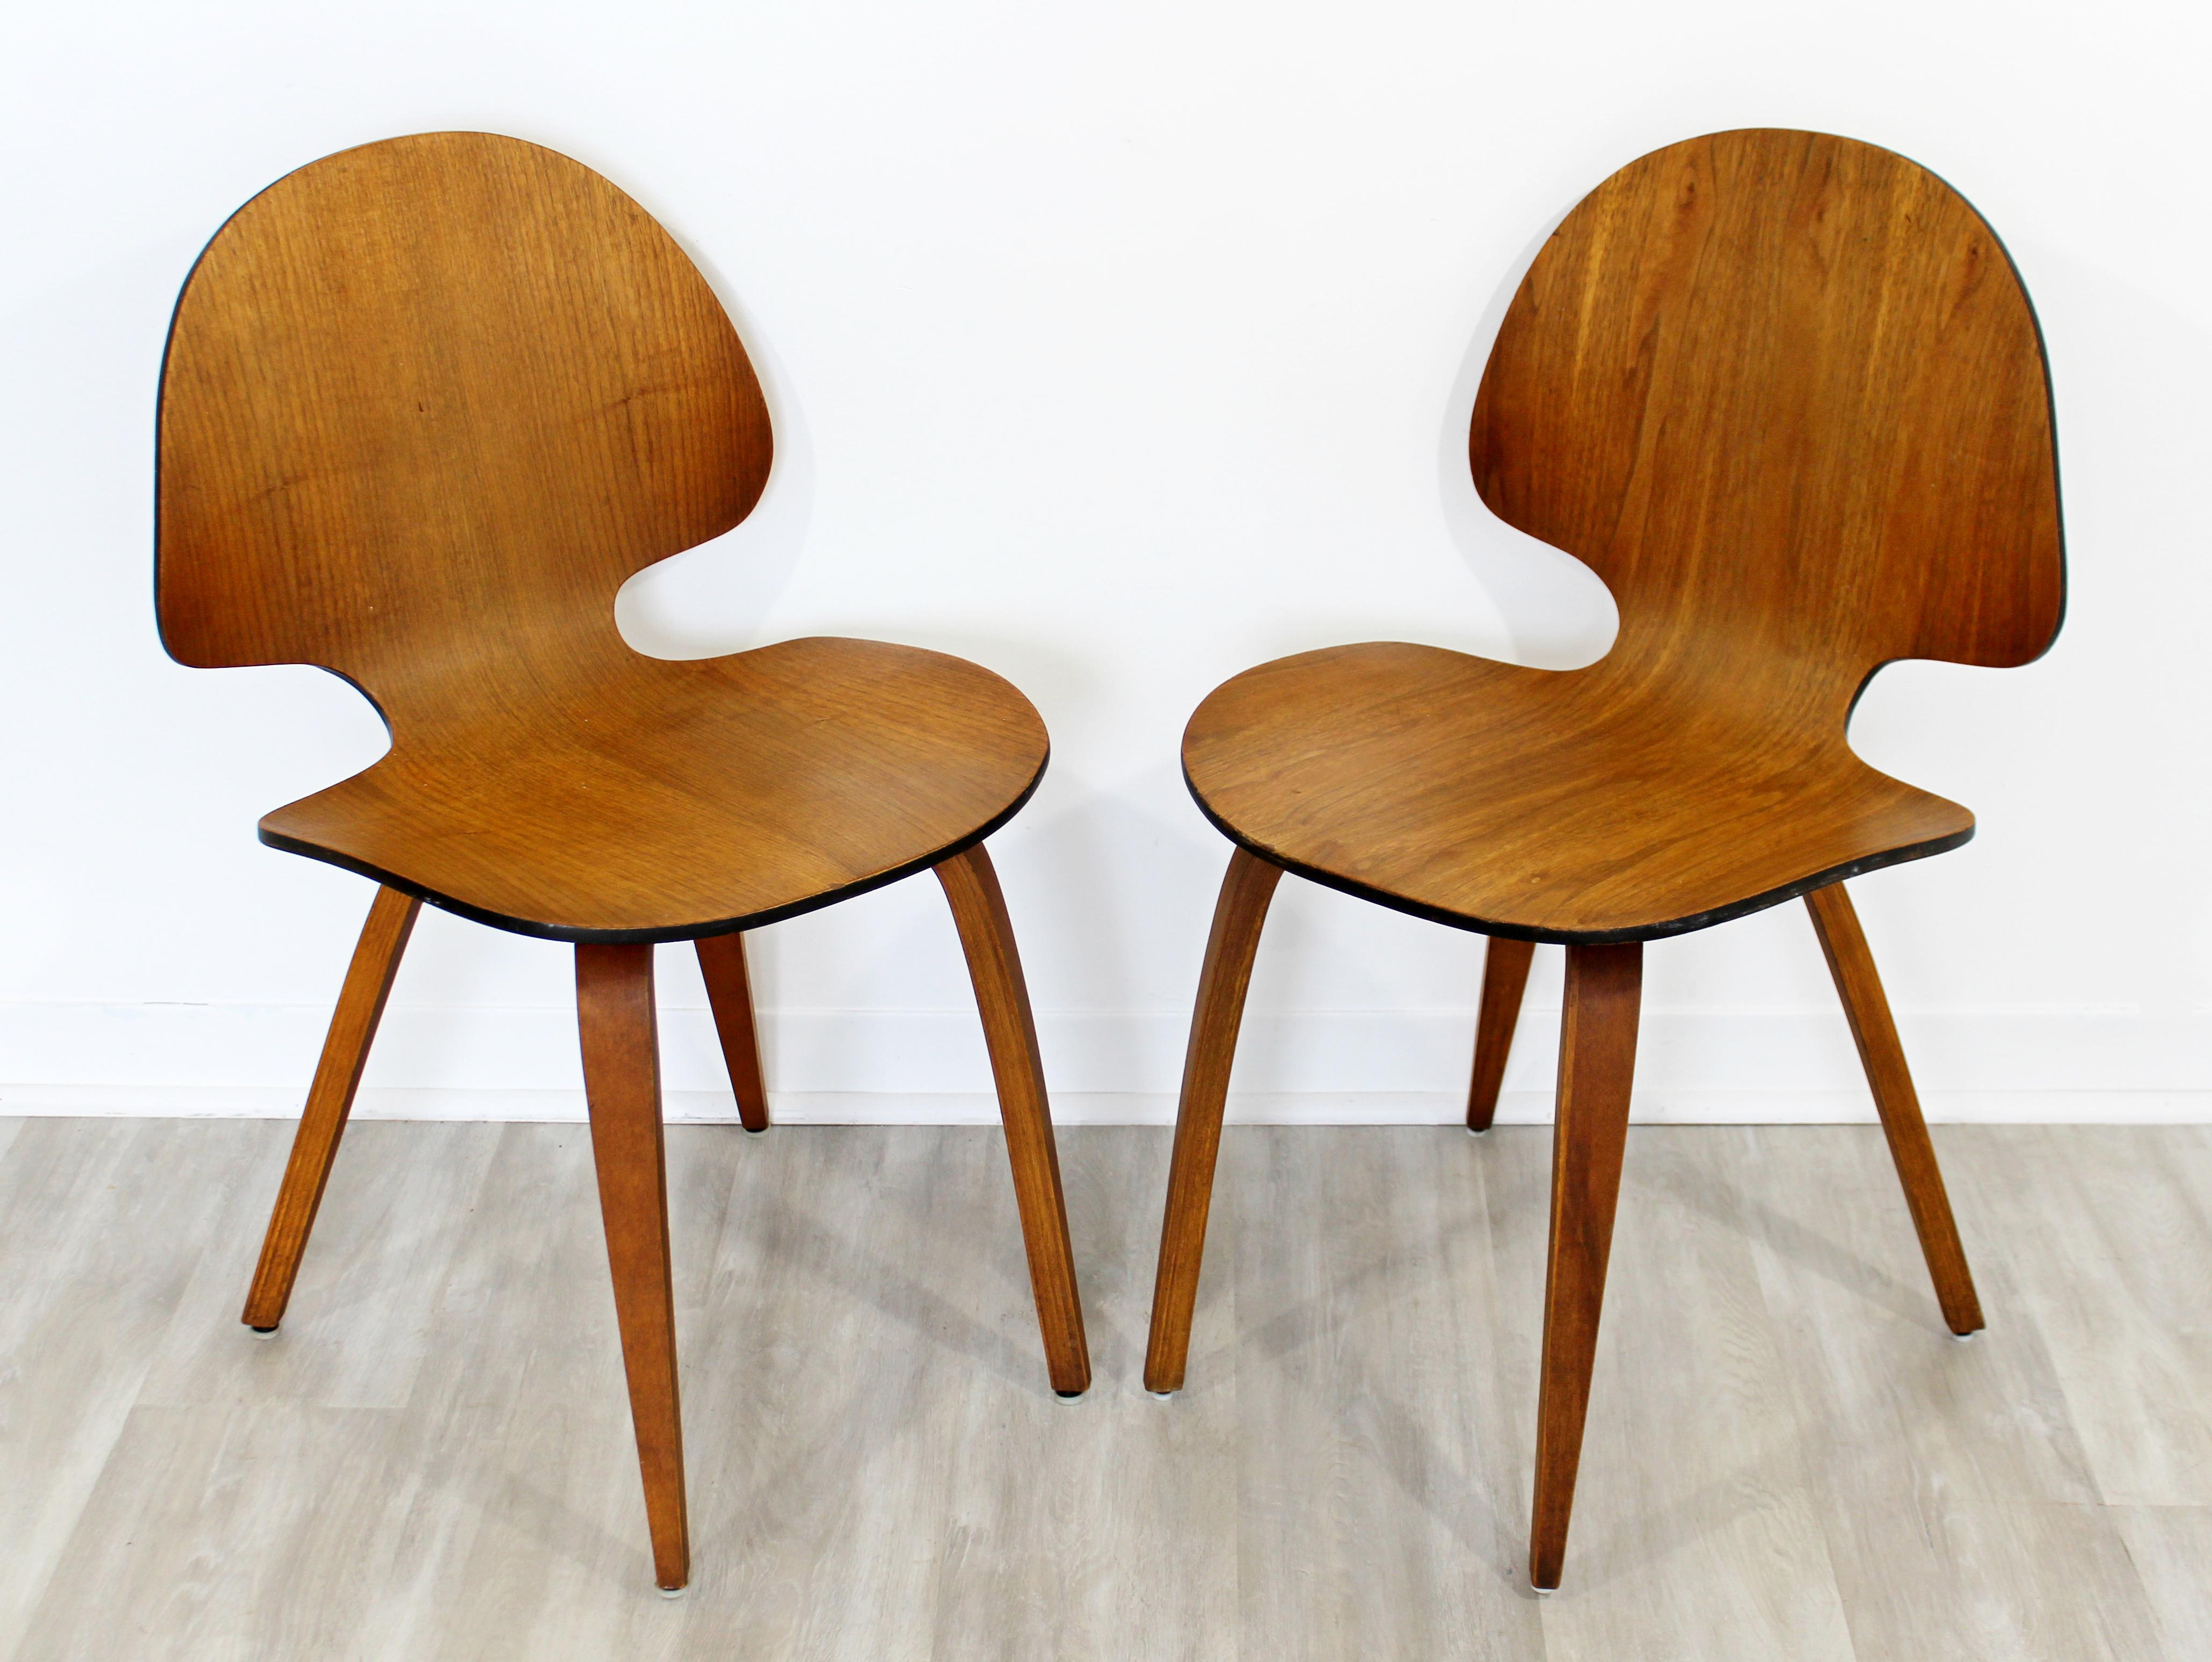 For your consideration is an eye-catching pair of curved or bent teak wood side chairs, in the style of Fritz Hansen, circa 1960s. In excellent vintage condition. The dimensions are 19